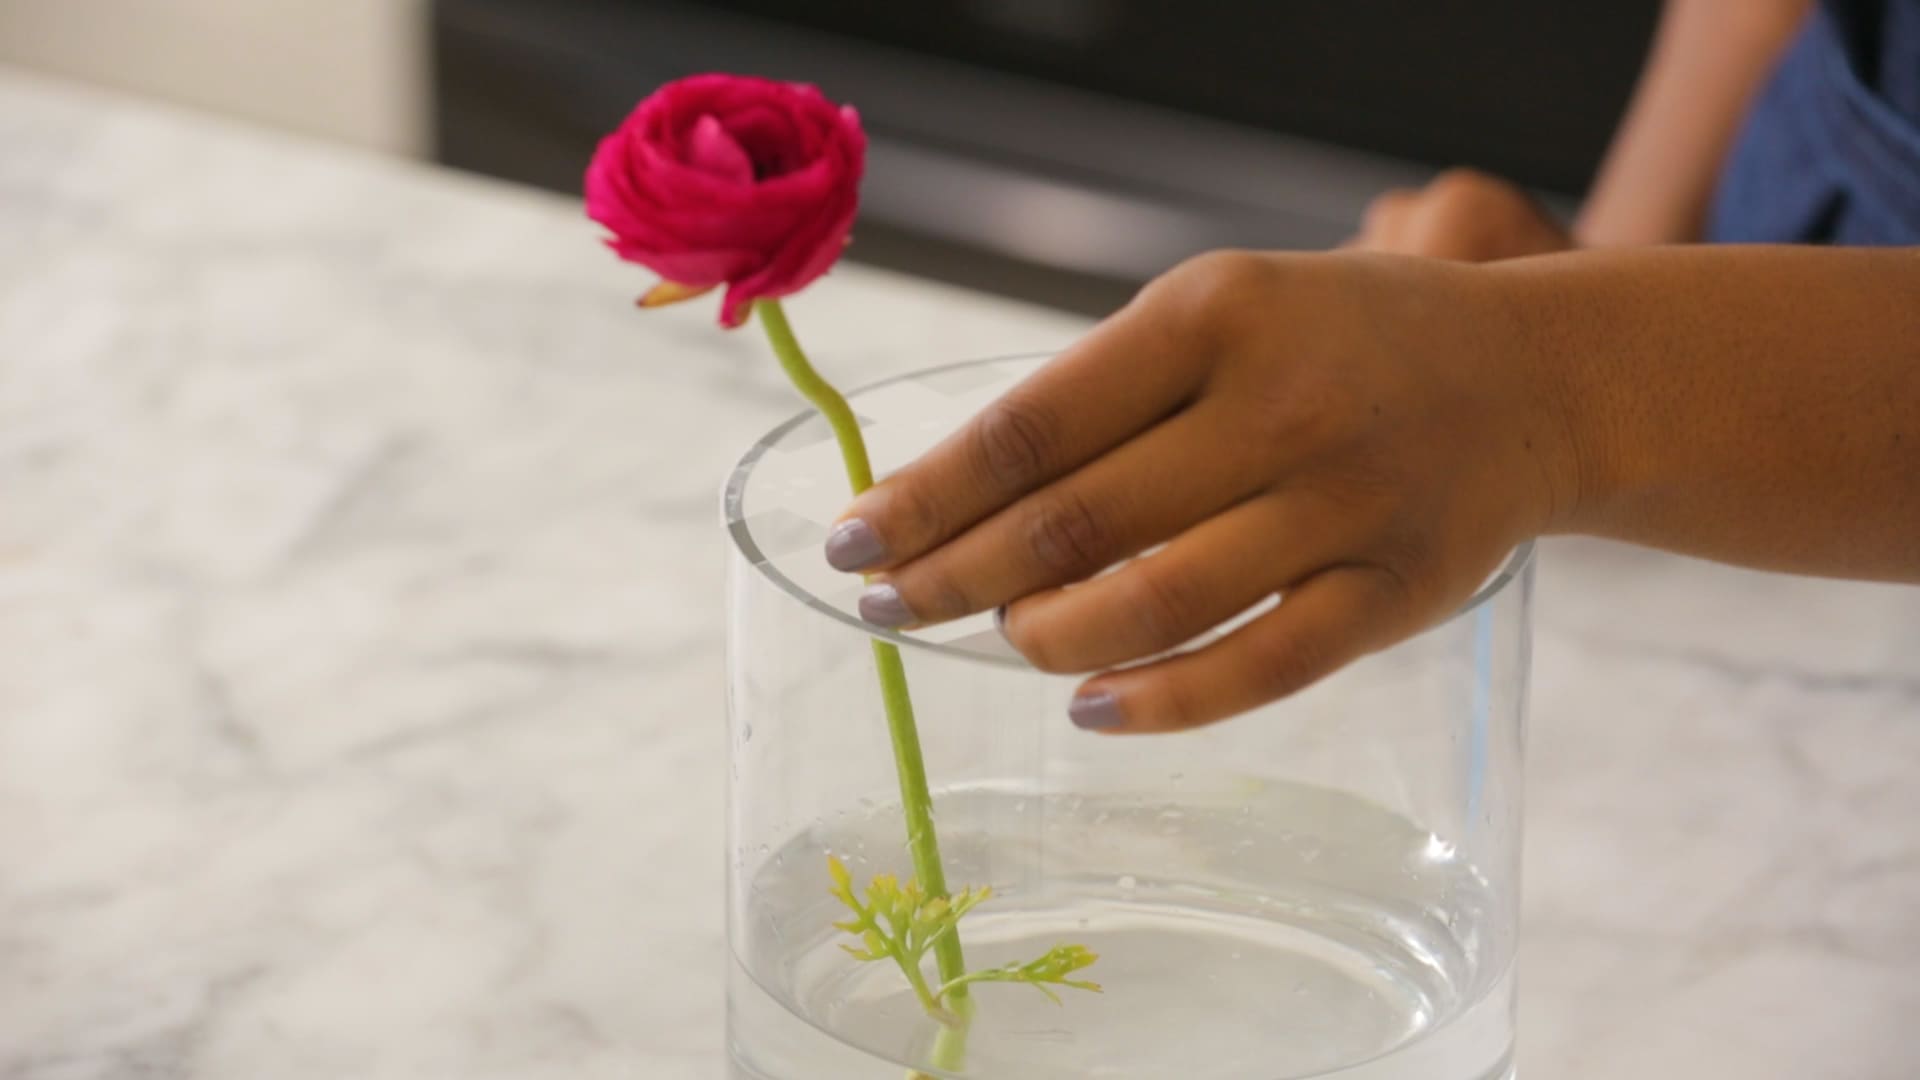 This Viral Tape Trick Makes Flower Arrangements Look Professional